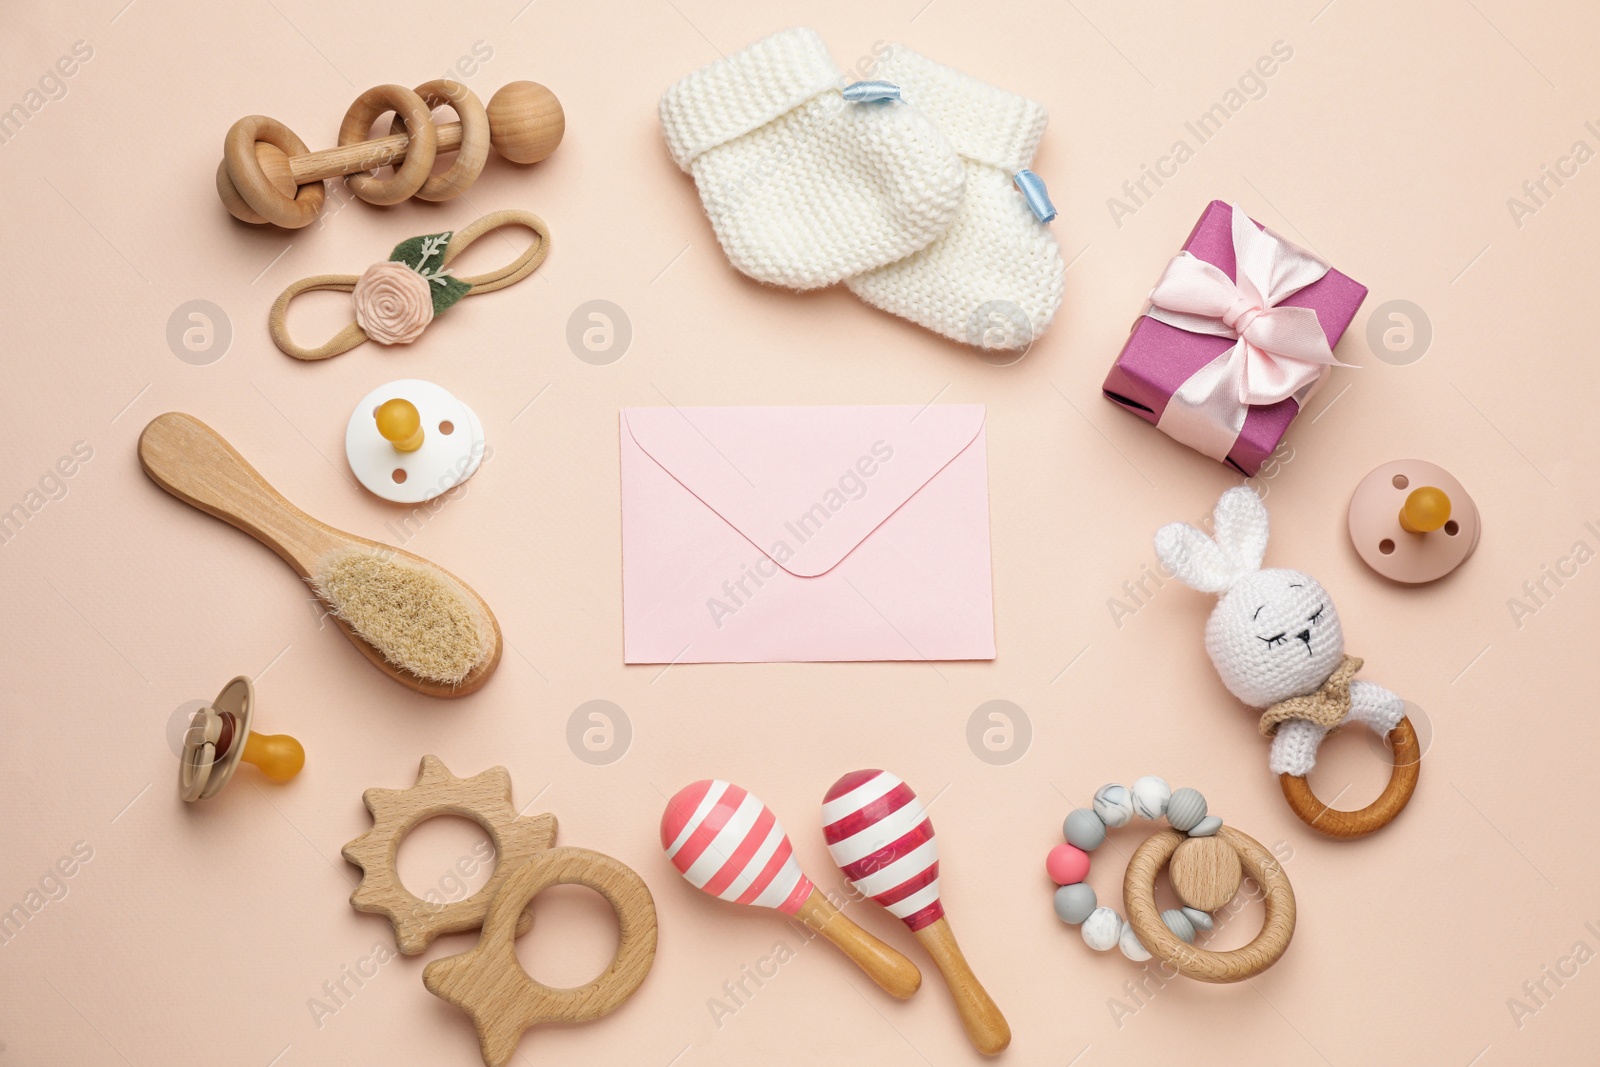 Photo of Envelope for baby shower and accessories on light pink background, flat lay